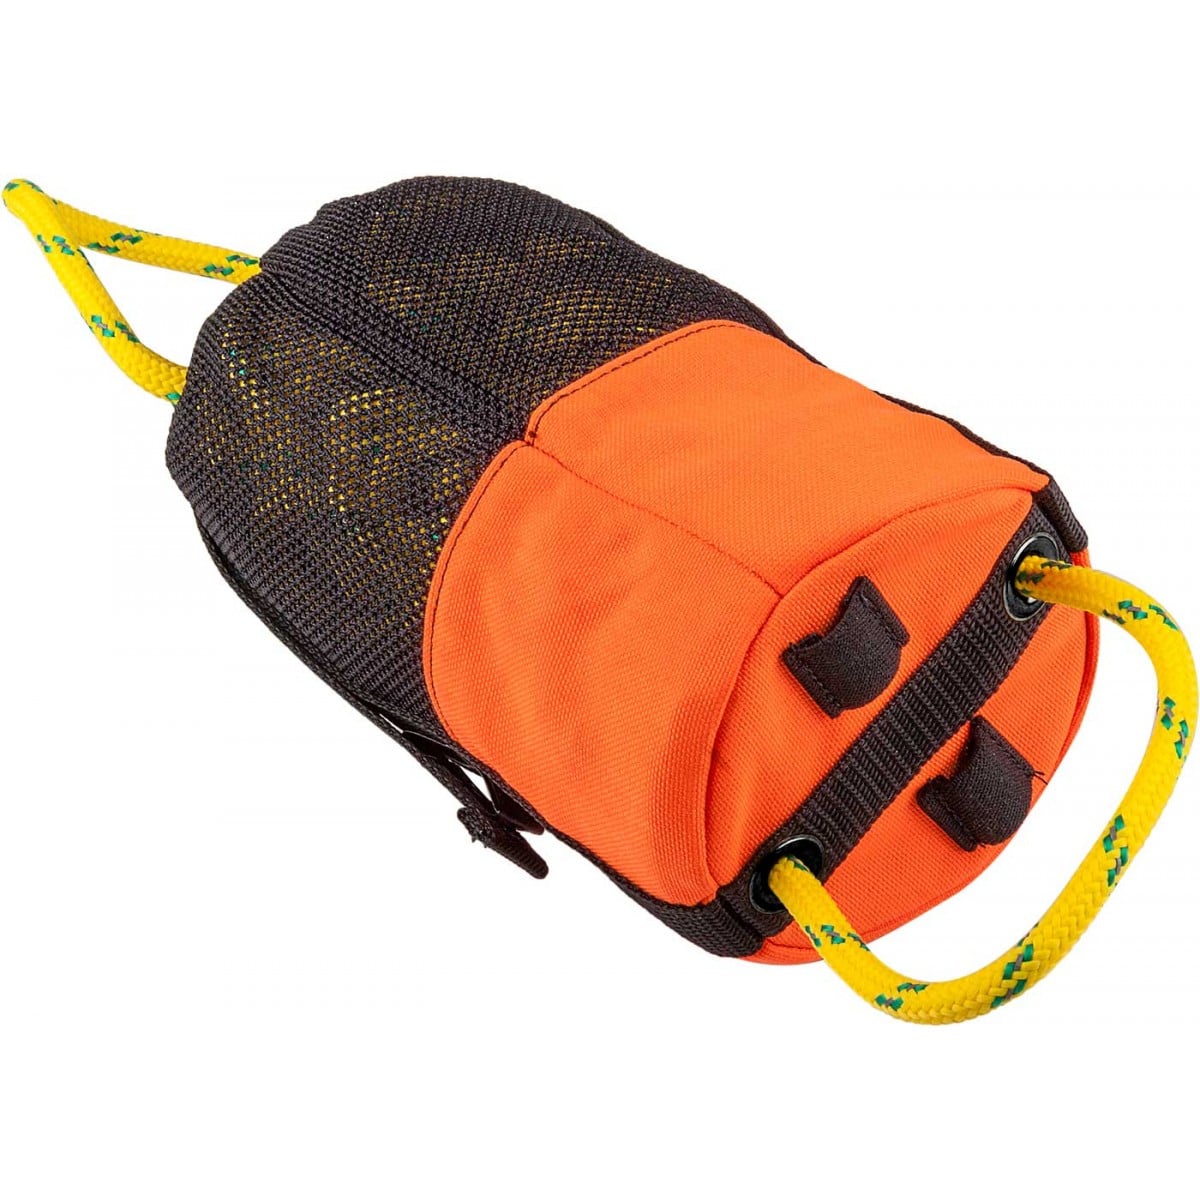 DasMarine Rescue Throw Bag, Rescue Rope Throw Bag with Floating Rope for  Boating Kayaking Ice Fishing Sailing (50FT) : Amazon.in: Sports, Fitness &  Outdoors